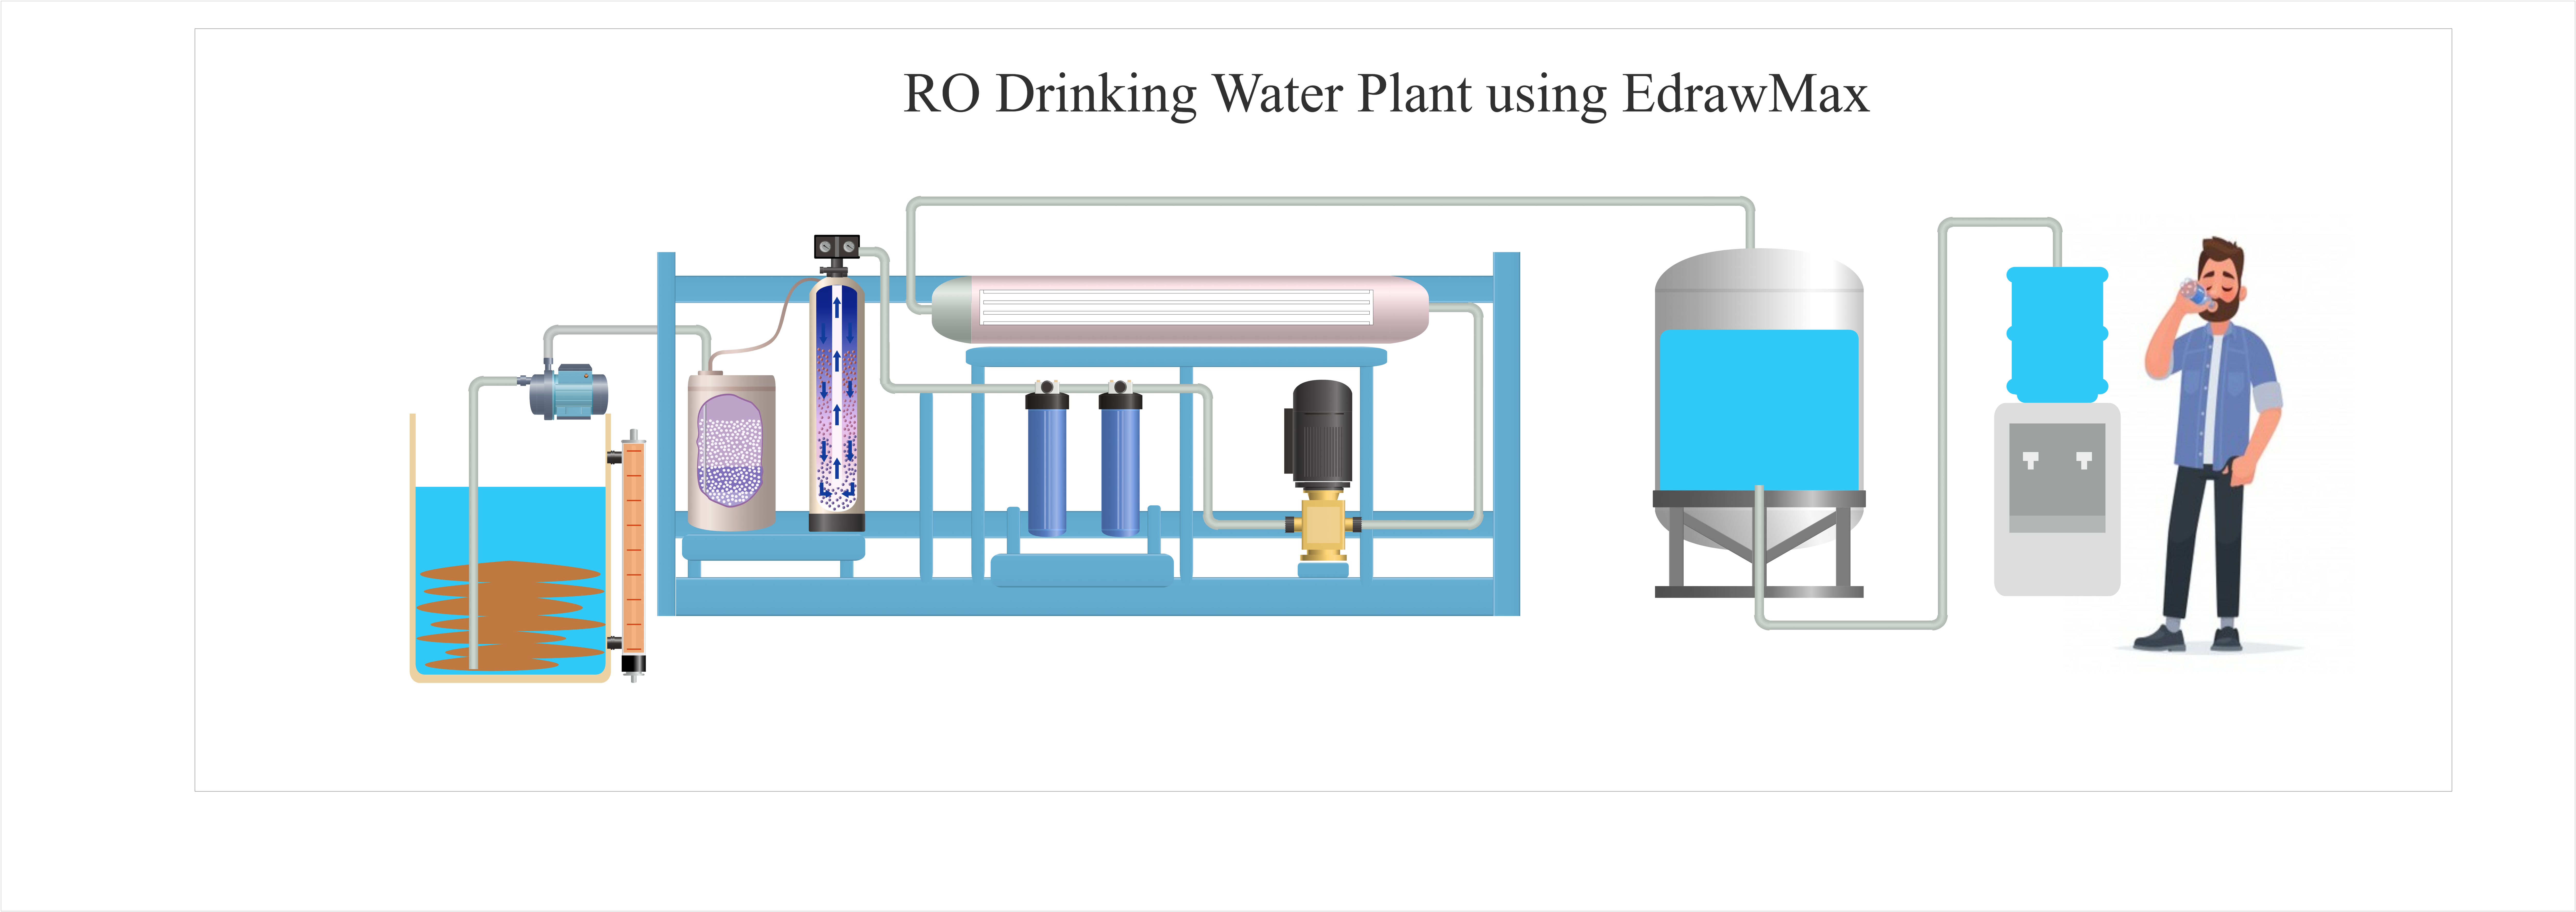 Here is the RO plant industrial design, from which you can see the layout of this system. A piping and instrumentation diagram is an articulate drawing of a processing plan that entails the piping and process equipment with its instrumentation and control